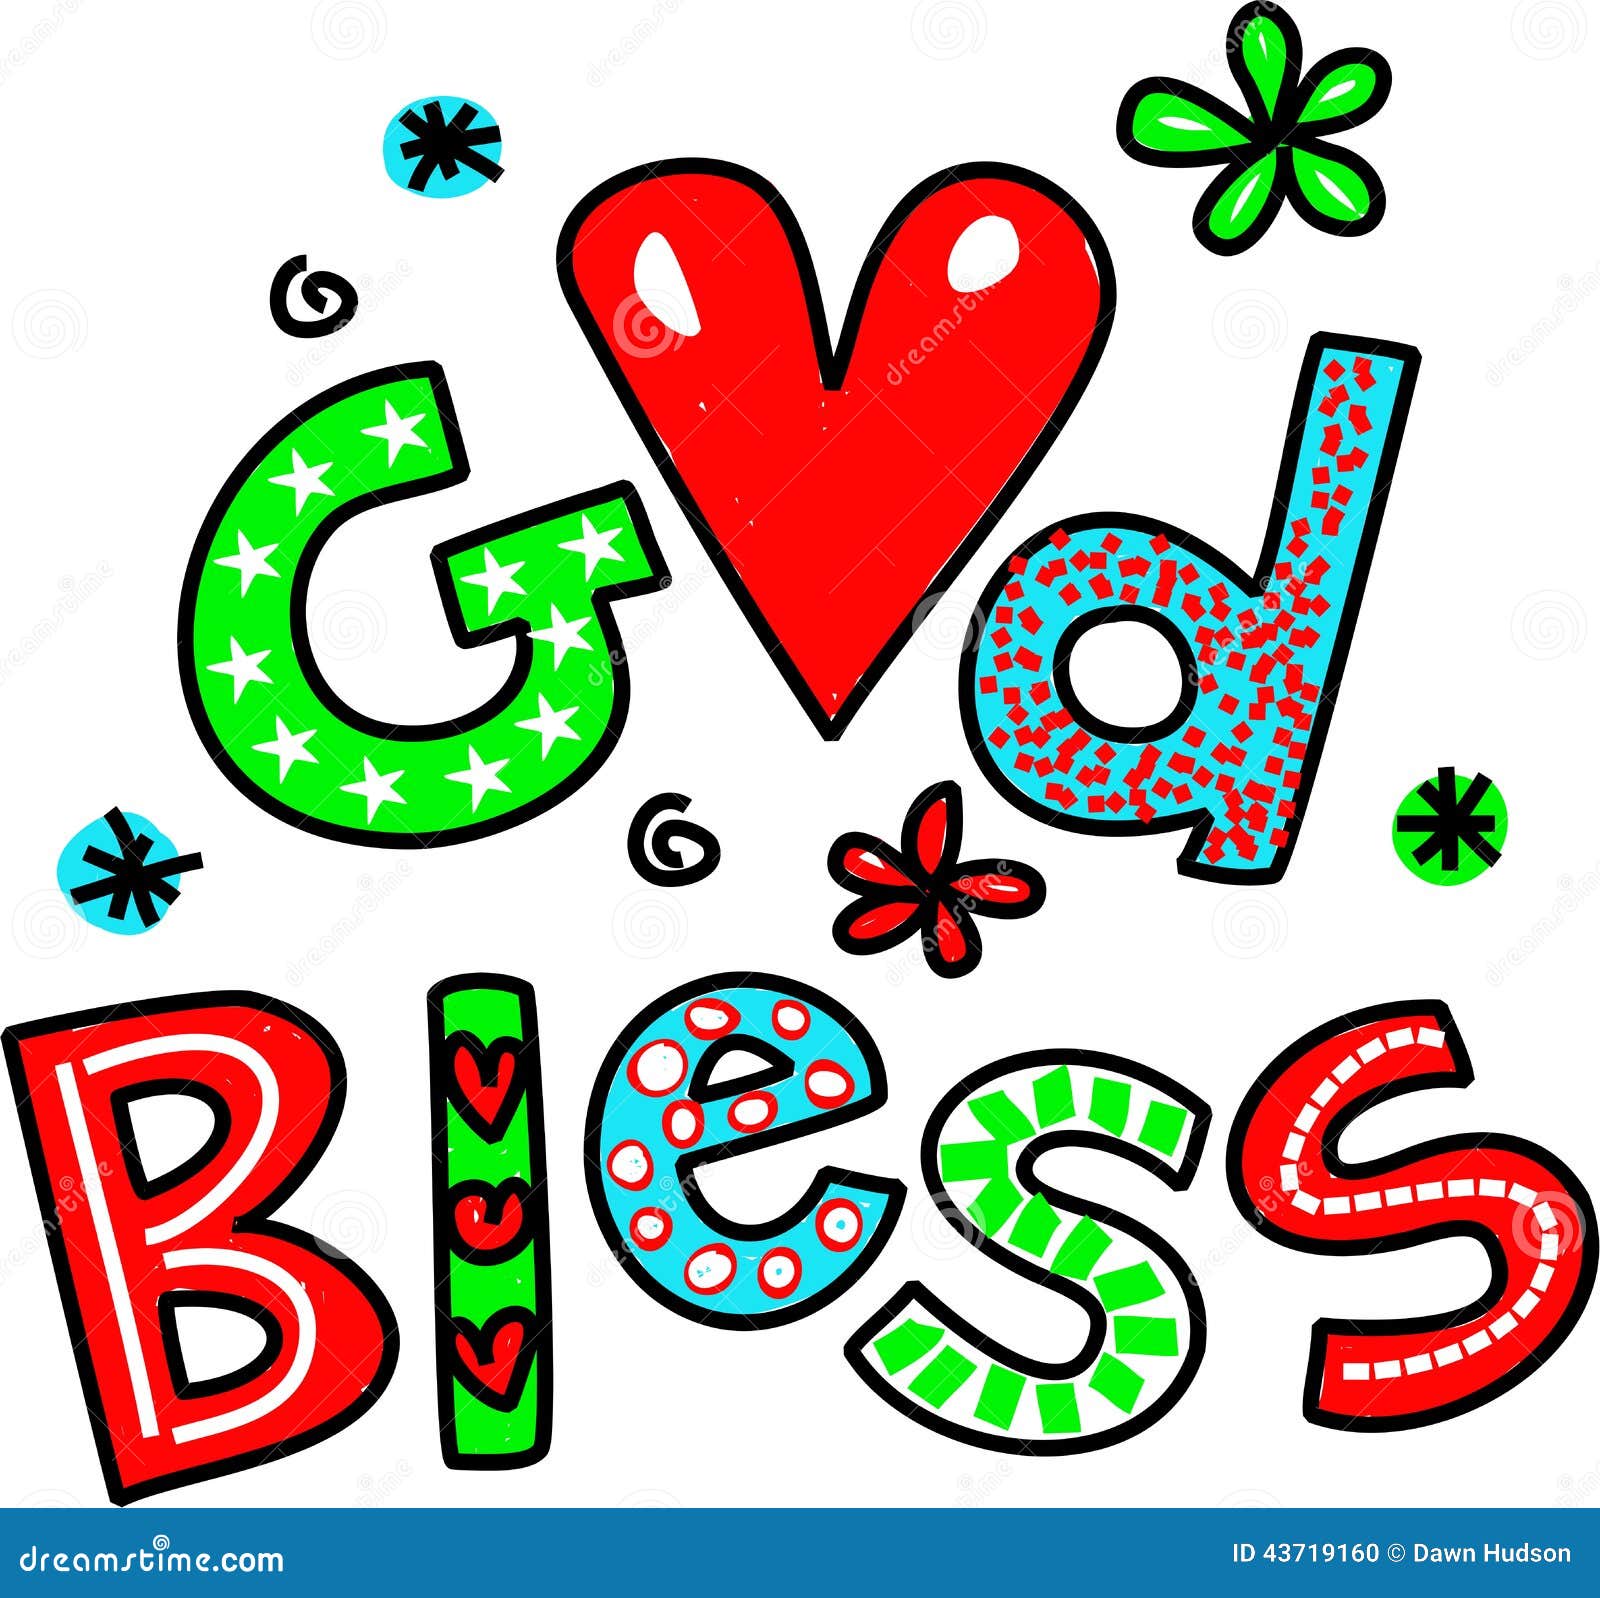 god bless you clipart - photo #17